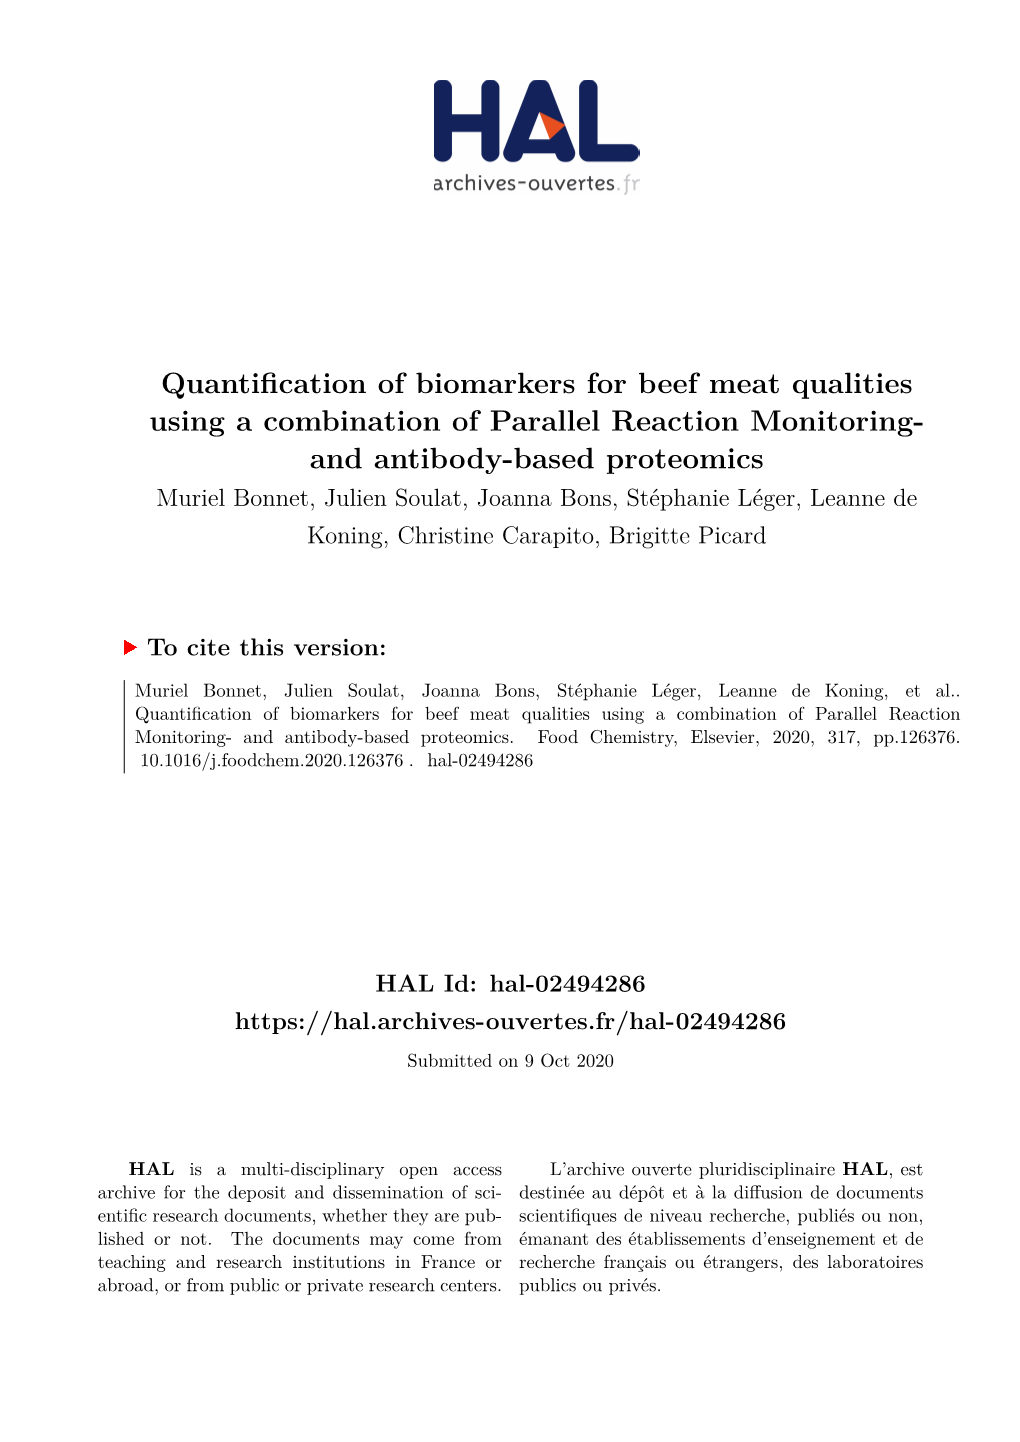 Quantification of Biomarkers for Beef Meat Qualities Using a Combination